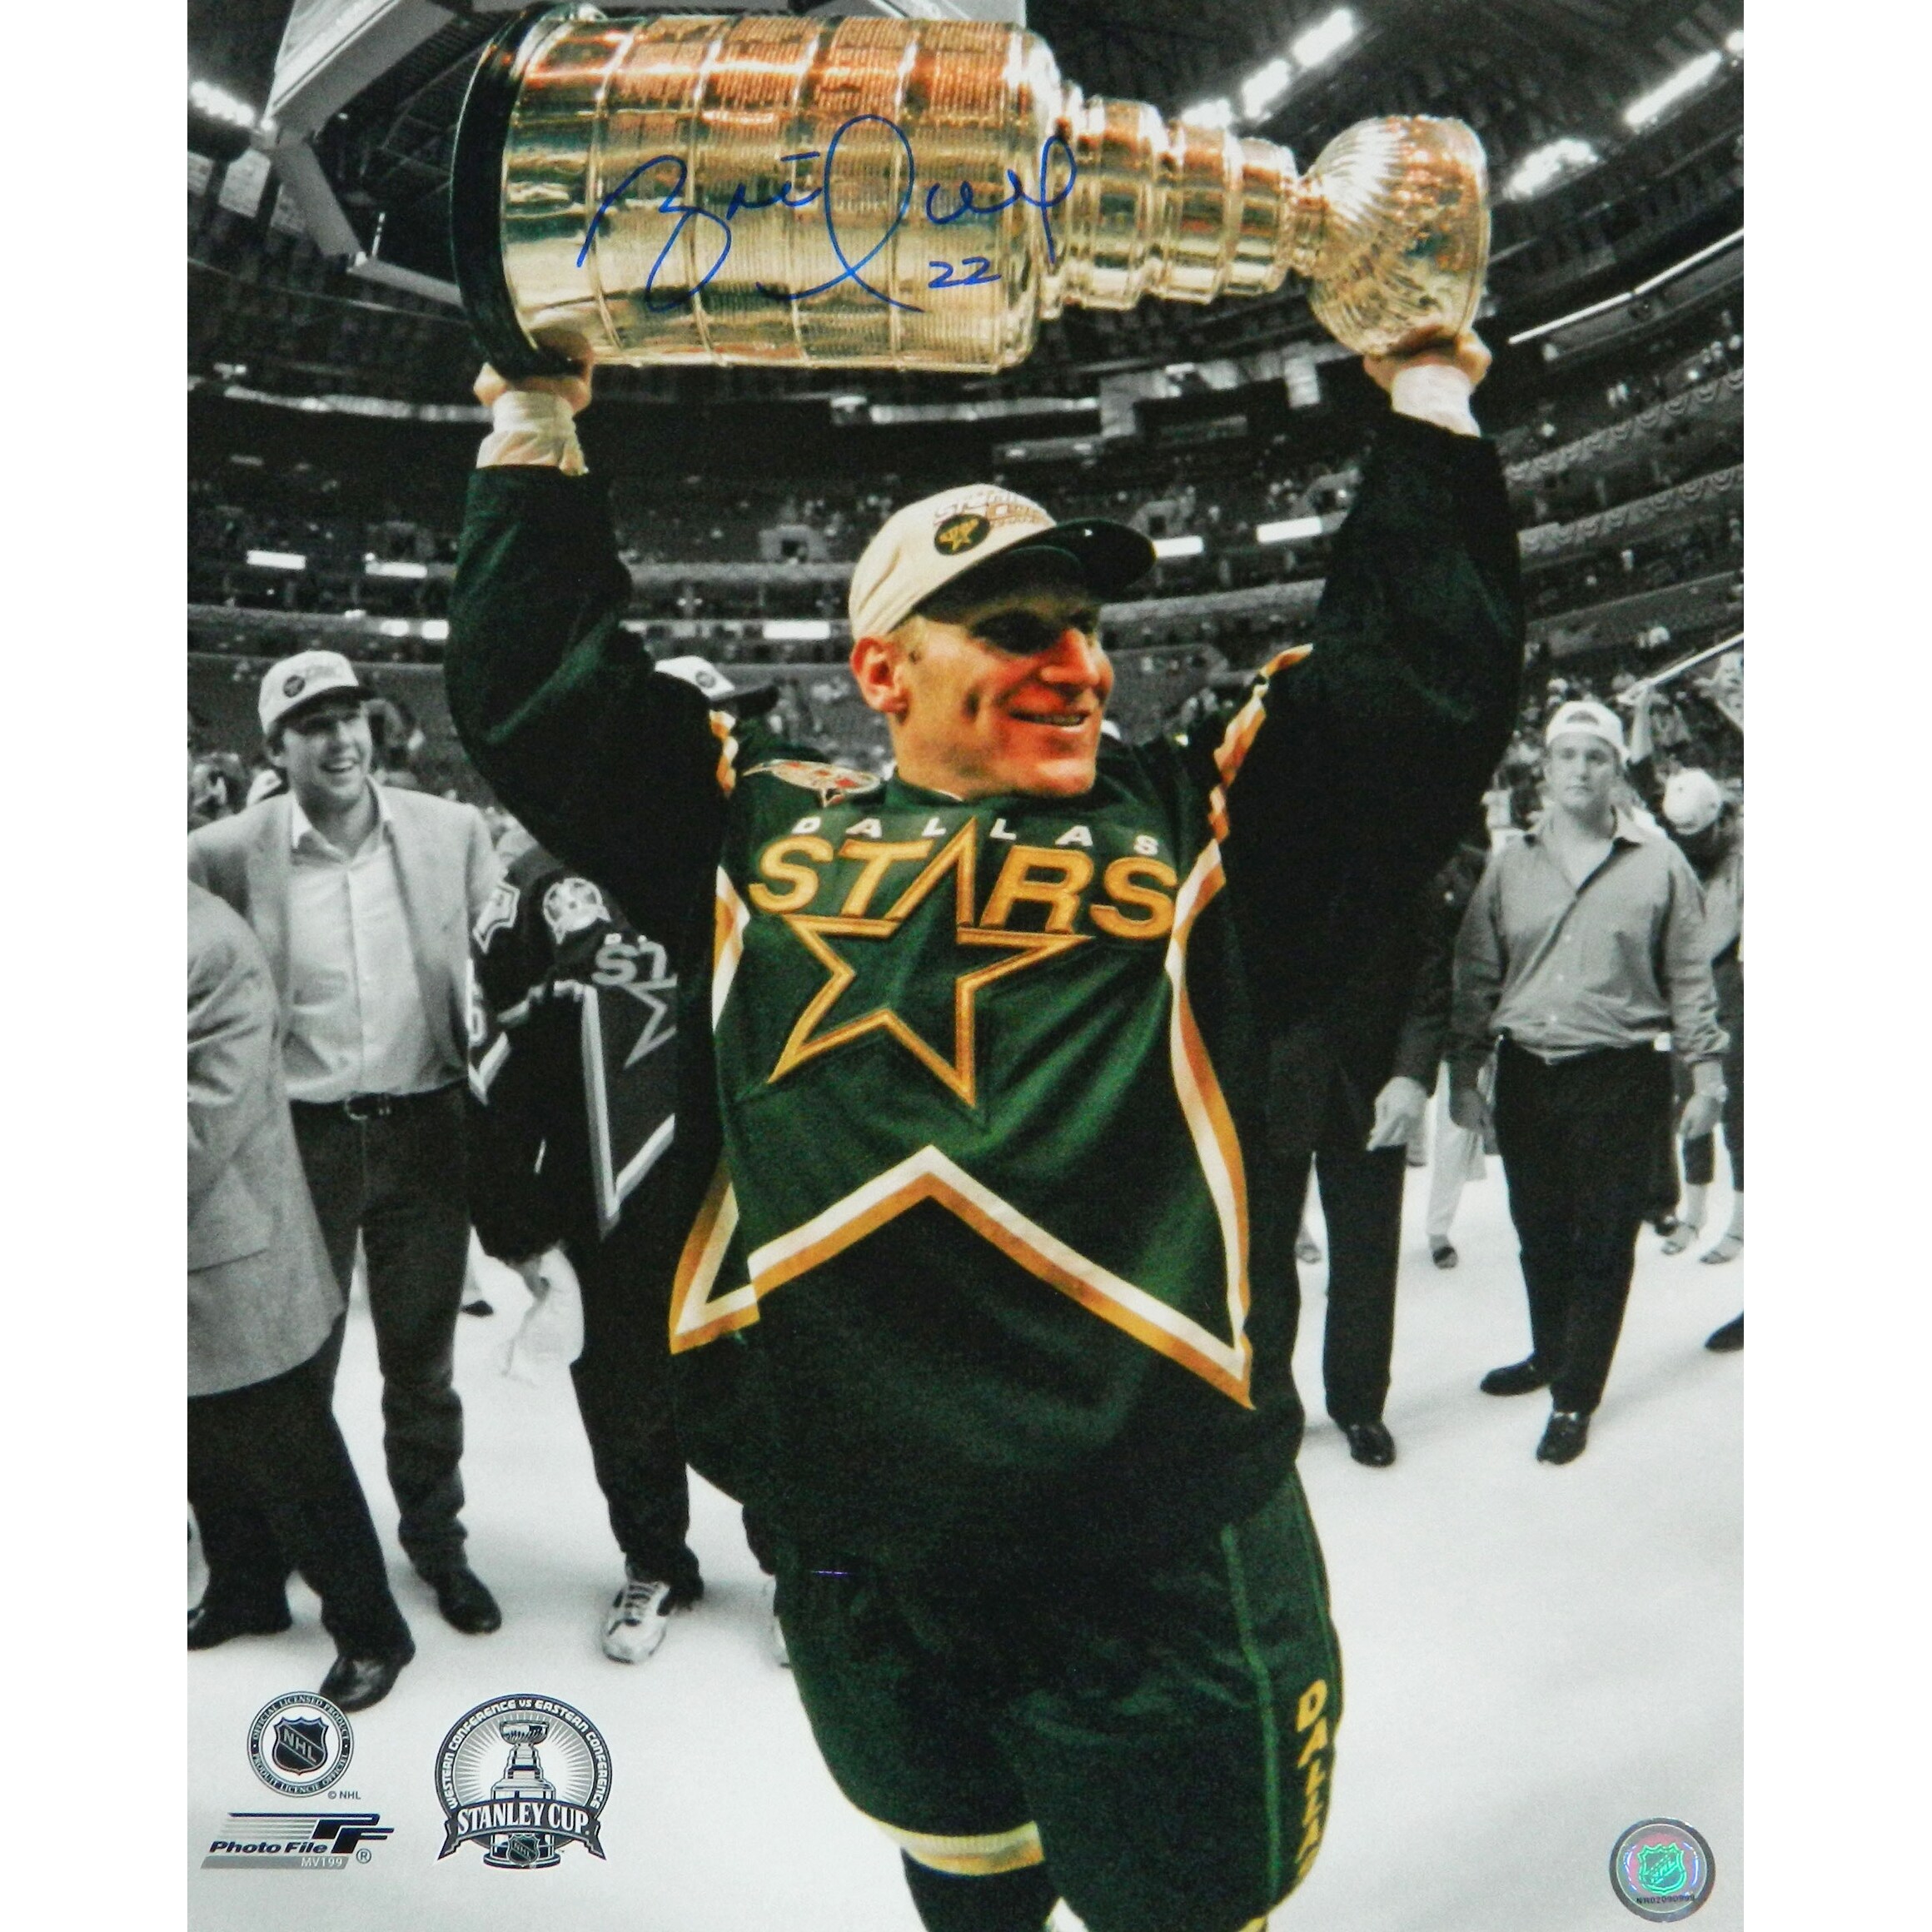 https://ak1.ostkcdn.com/images/products/is/images/direct/a537366e7351db77754a66072cb4d64100a0df76/Brett-Hull-Dallas-Stars-Holding-1999-Stanley-Cup-16x20-Photo.jpg